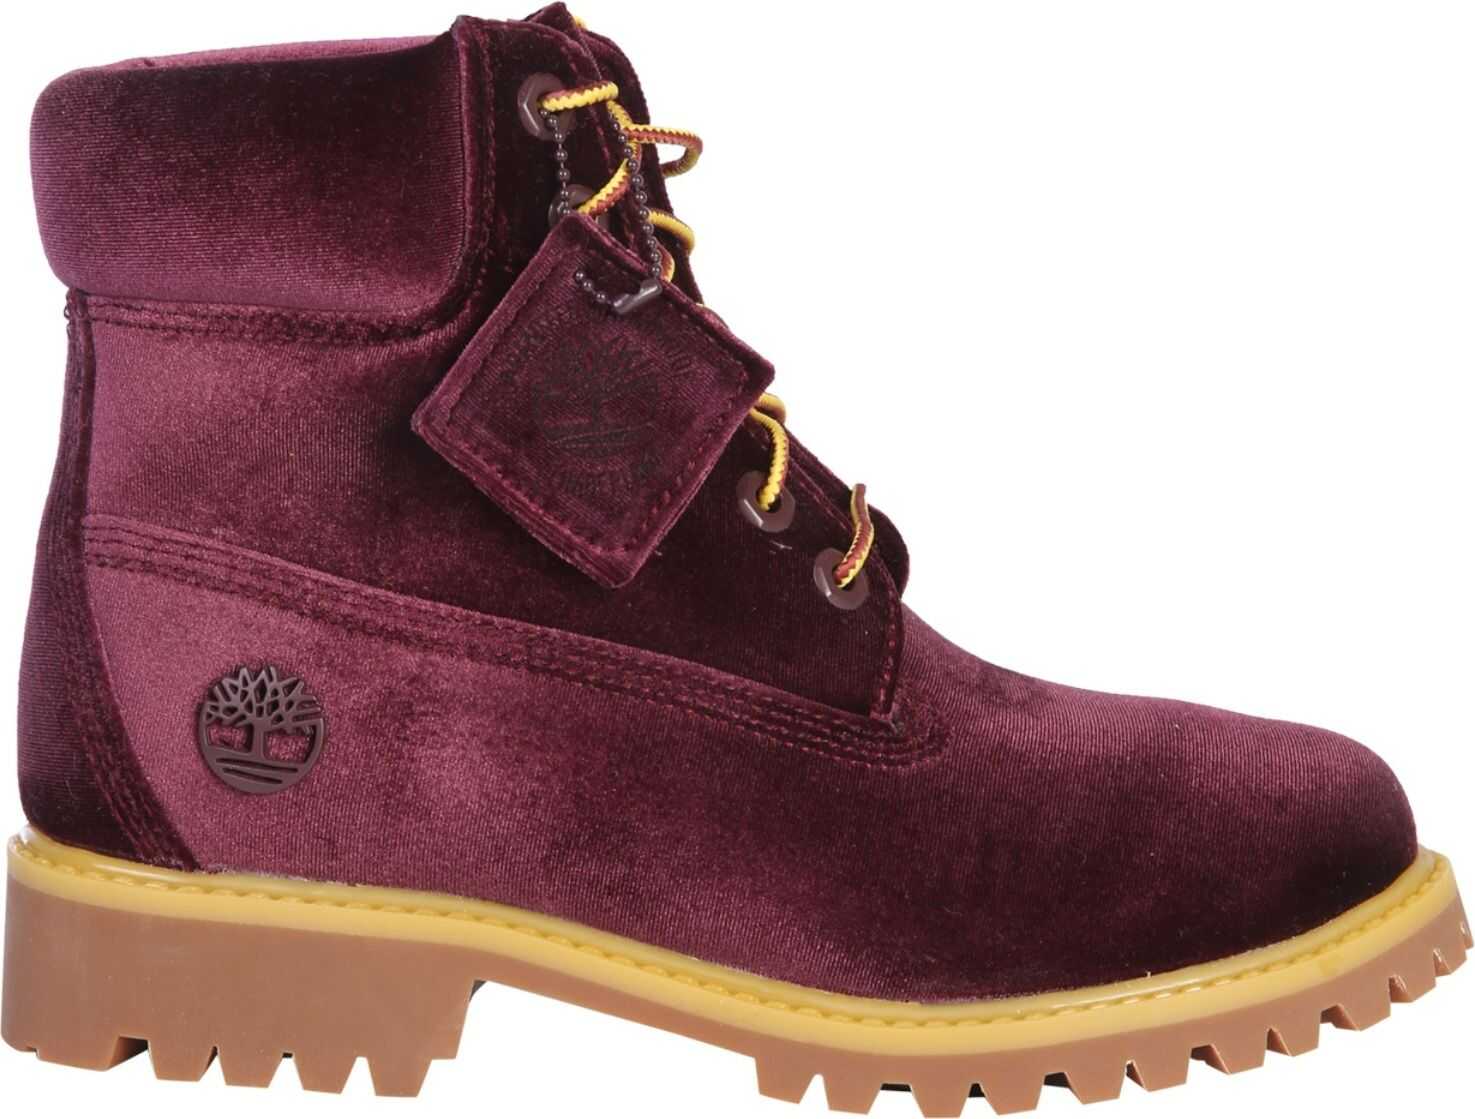 Off-White Timberland Maroon Boots BORDEAUX